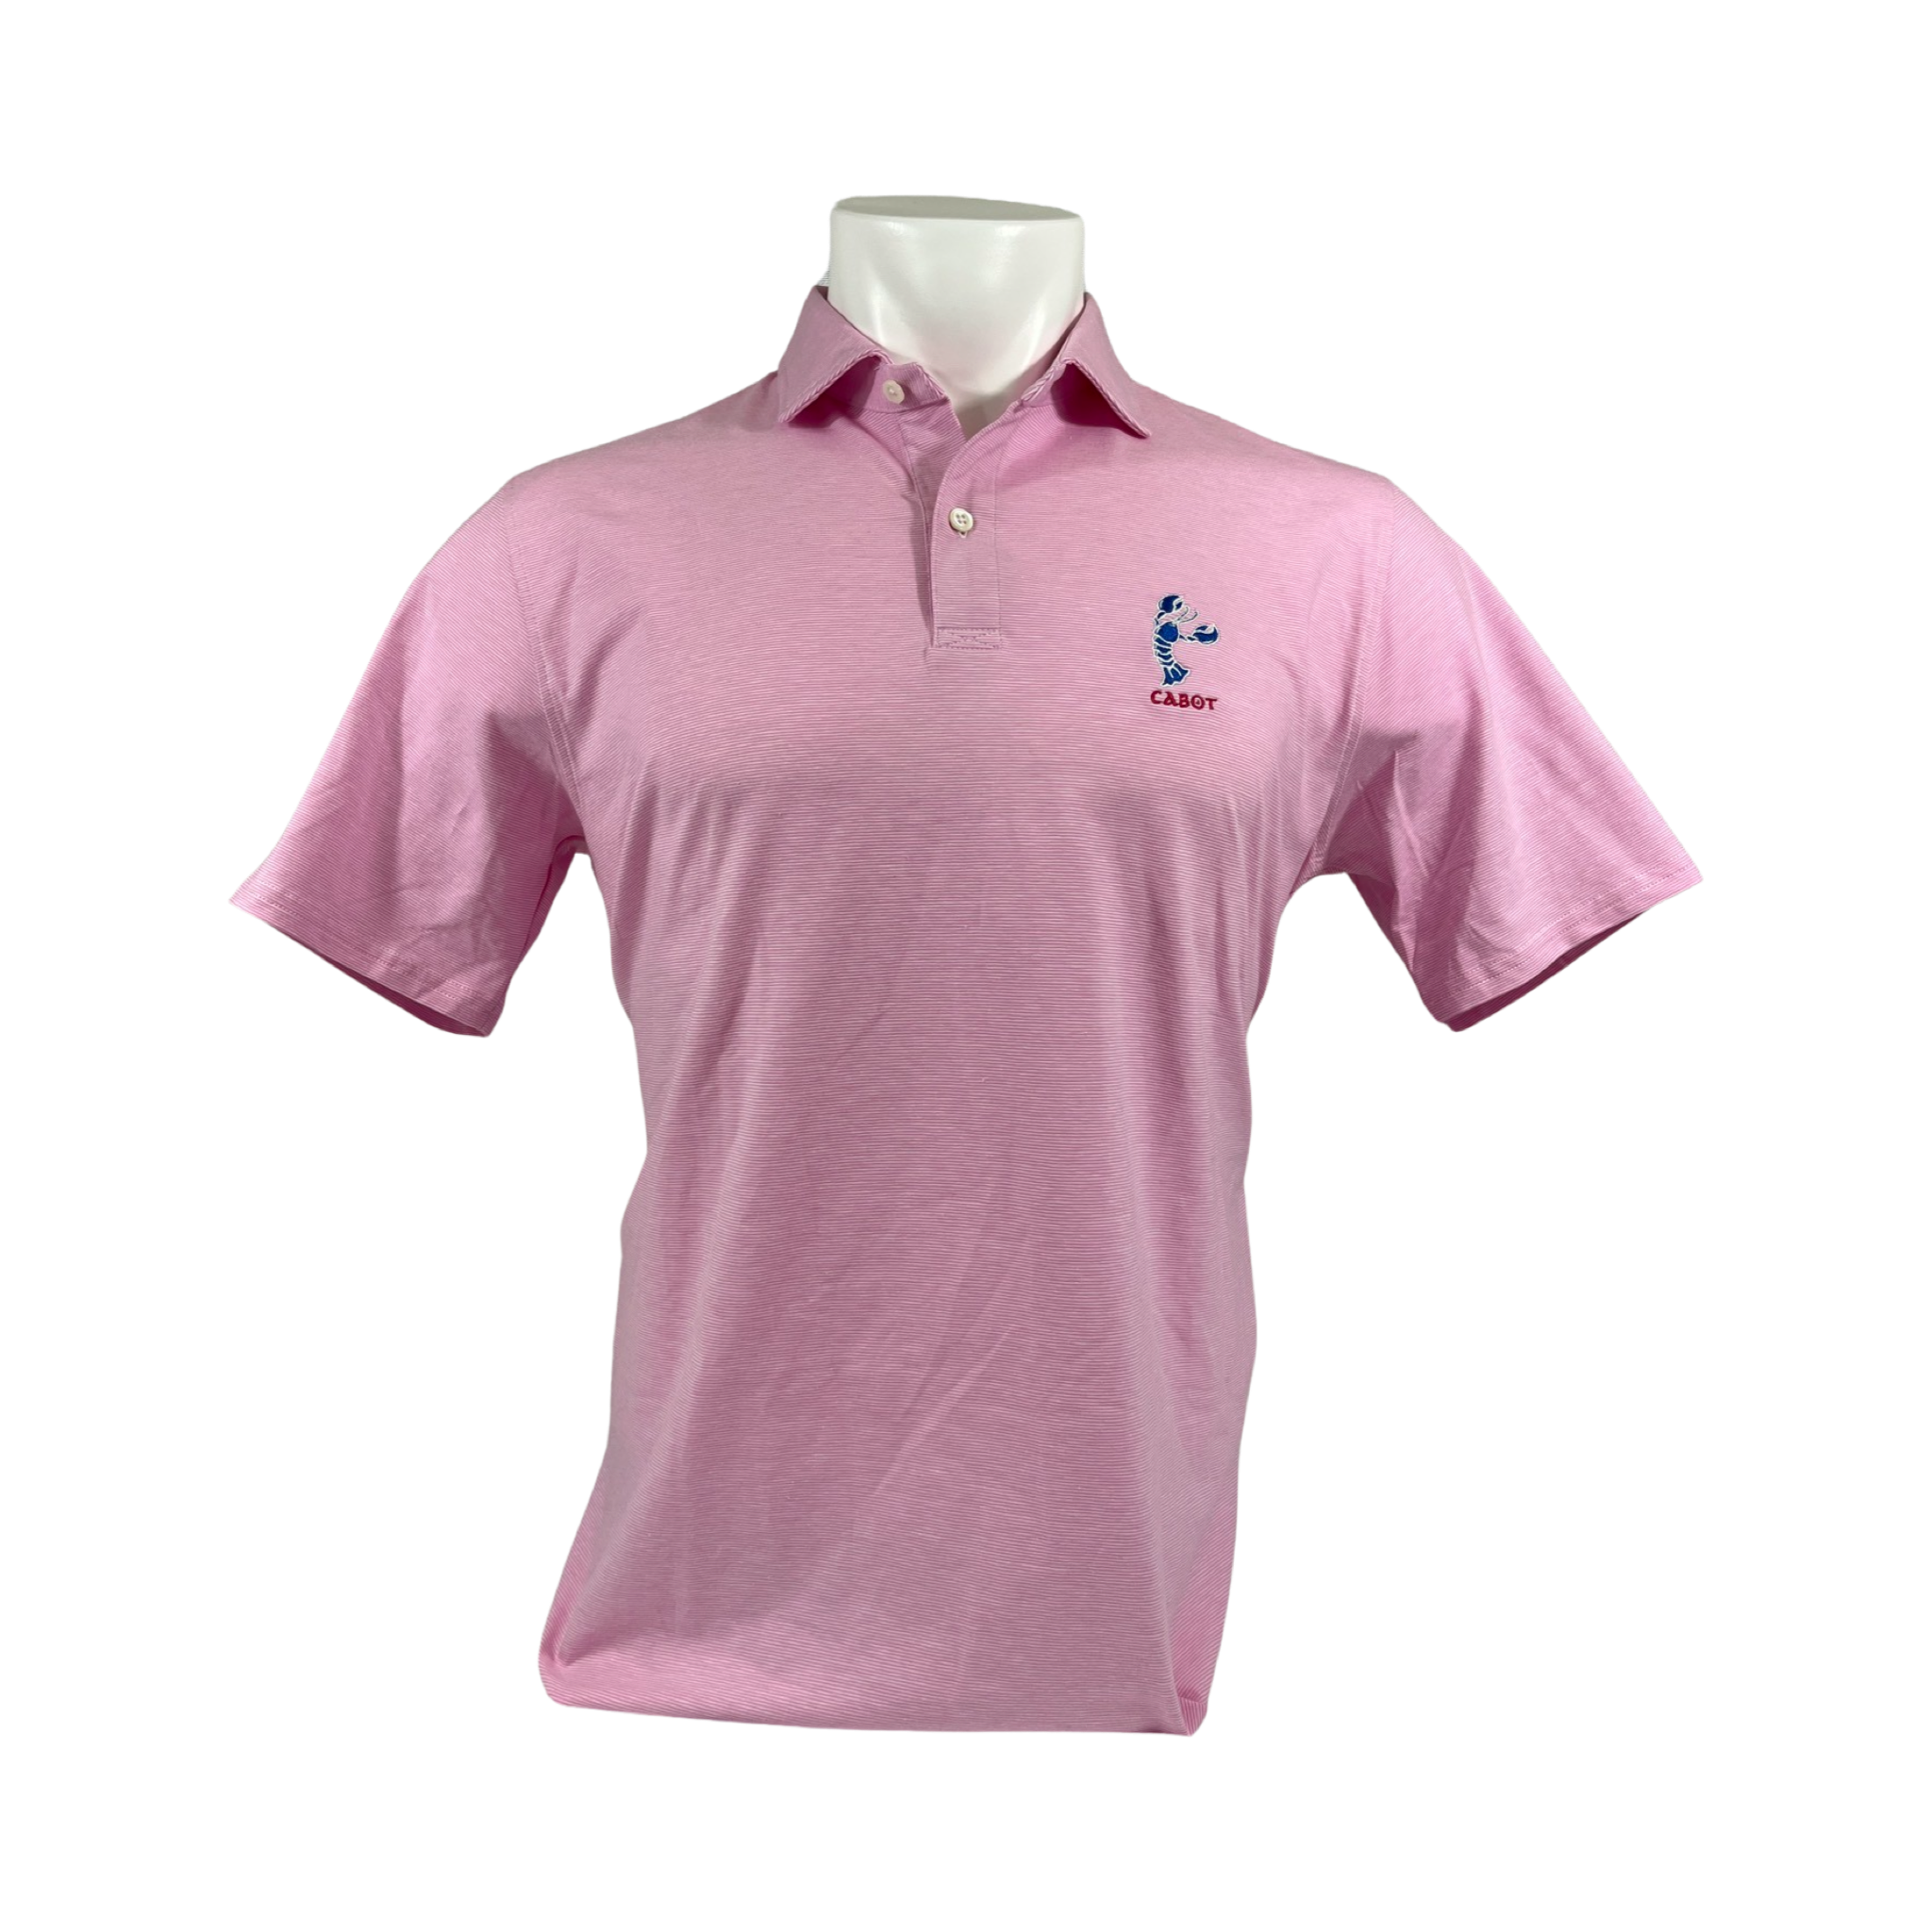 Holderness & Bourne Cabot Cliffs 'The Hunter' Polo